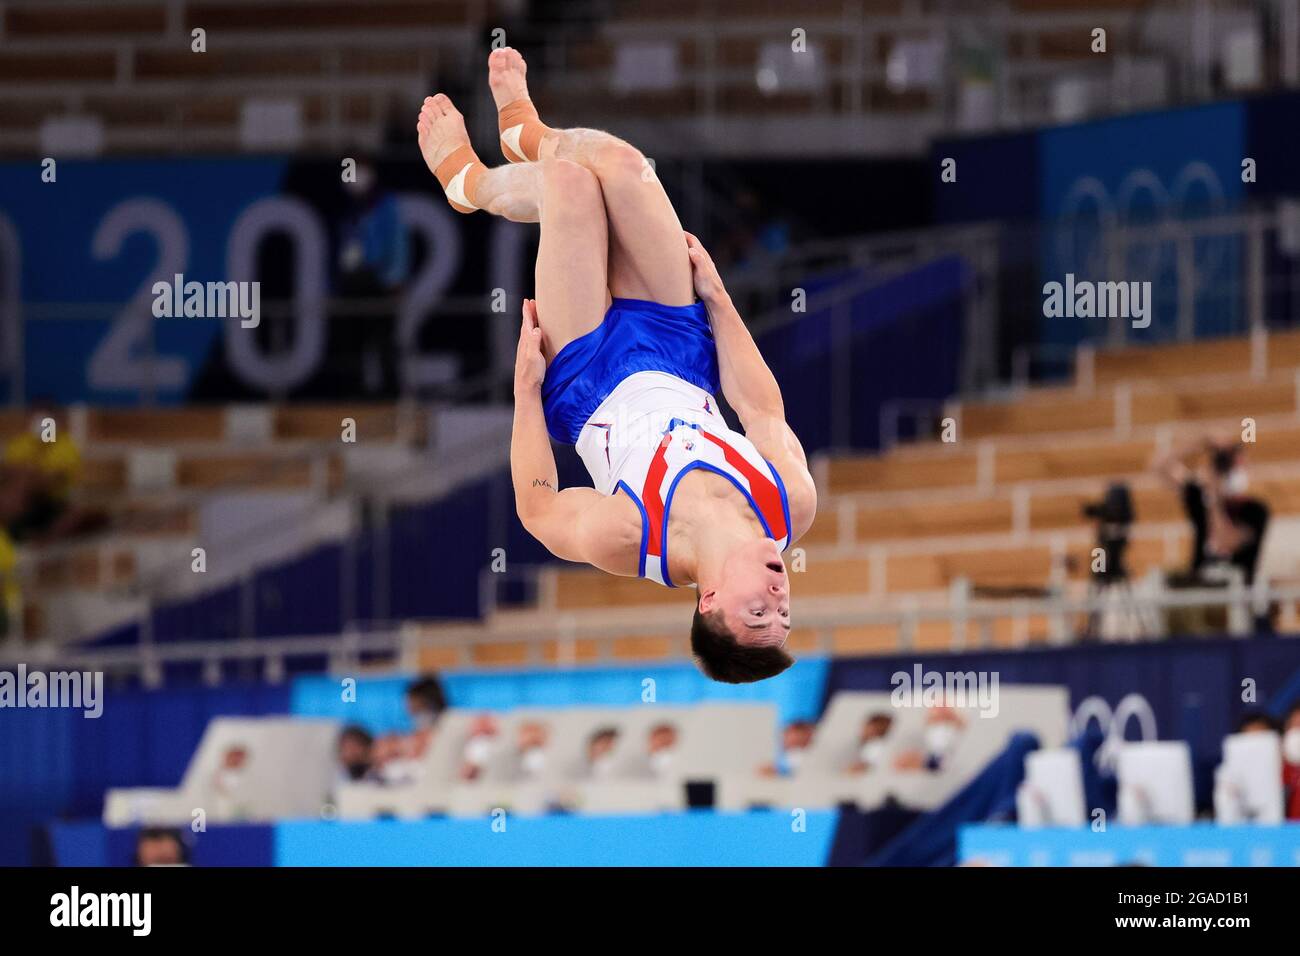 Tokyo, Japan, 28 July, 2021. Nikita Nagornyy of Team ROC on vaults during the Men's All Around Gymnastics Final on Day 5 of the Tokyo 2020 Olympic Games at Ariake Gymnastics Centre on July 28, 2021 in Tokyo, Japan. (Photo by Pete Dovgan/Speed Media/Alamy Live News) Stock Photo